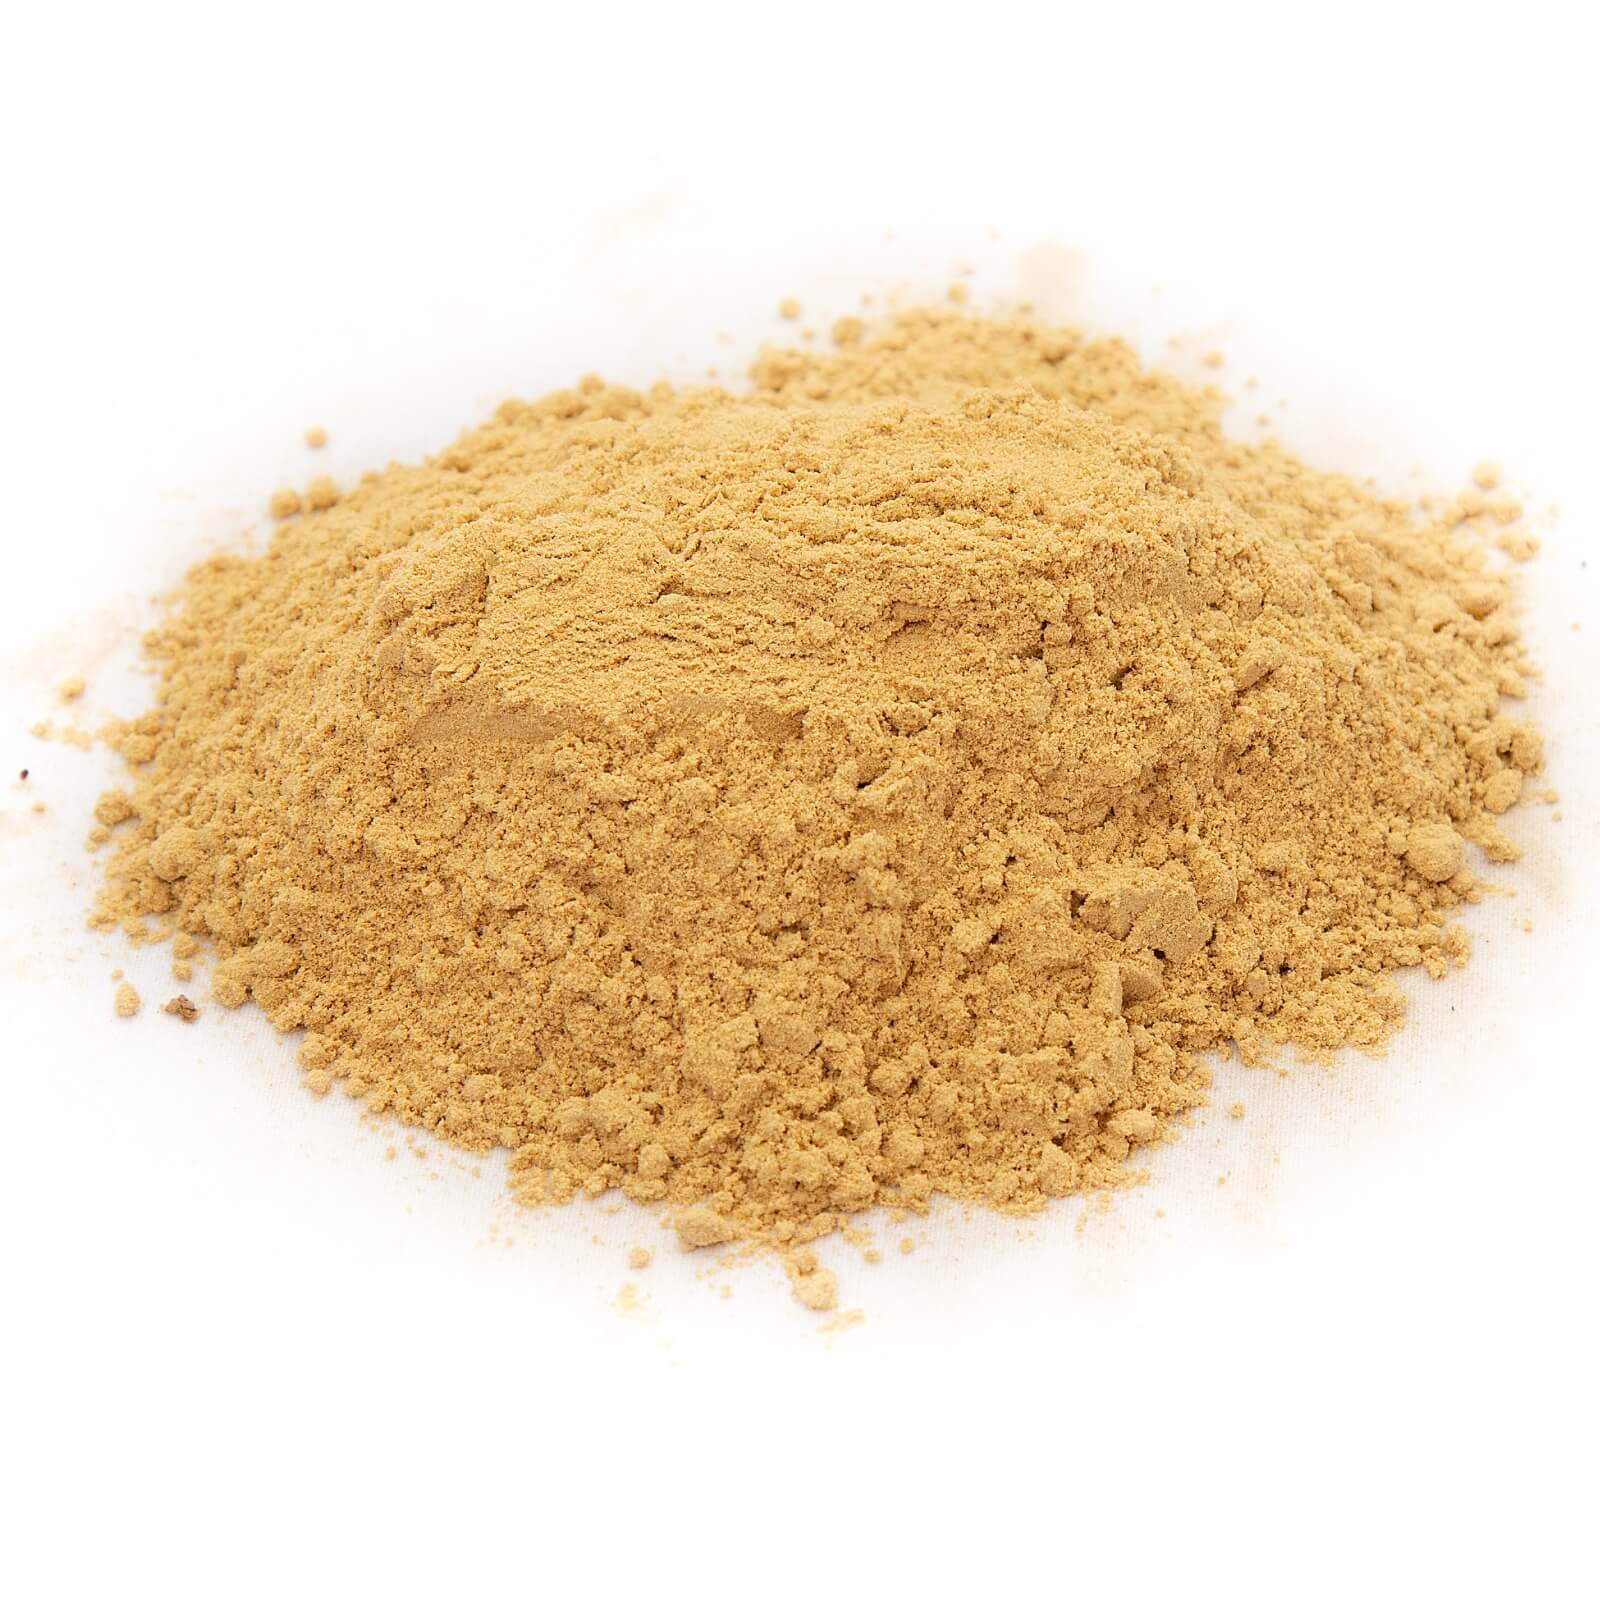 The surprising health benefits of ginger powder